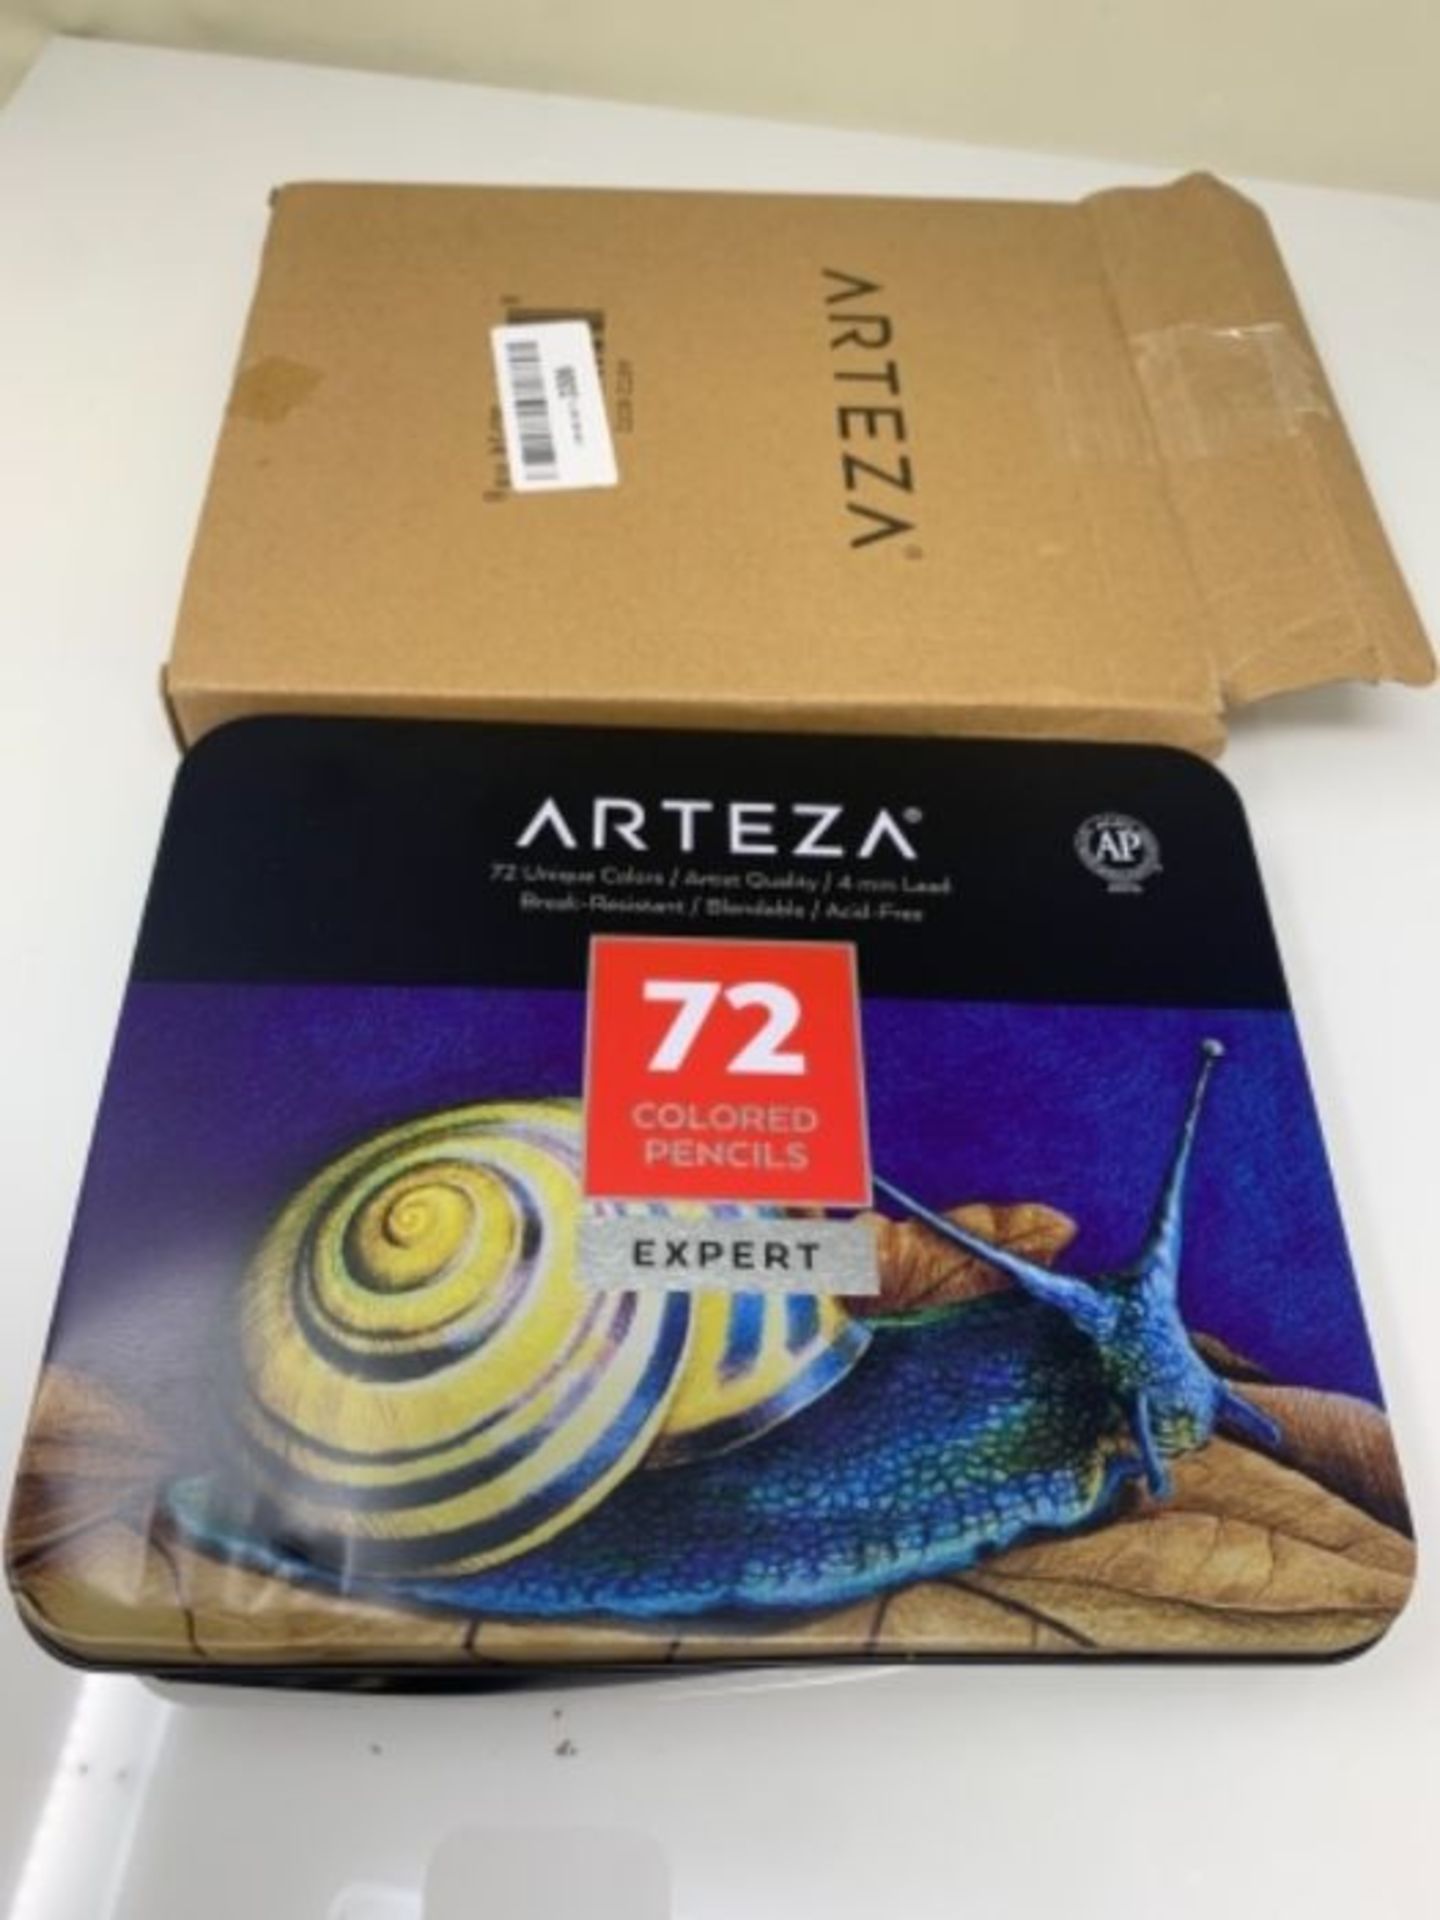 Arteza Colouring Pencils, Professional Set of 72 Colours in a Tin Box, Soft Wax-Based - Image 2 of 3